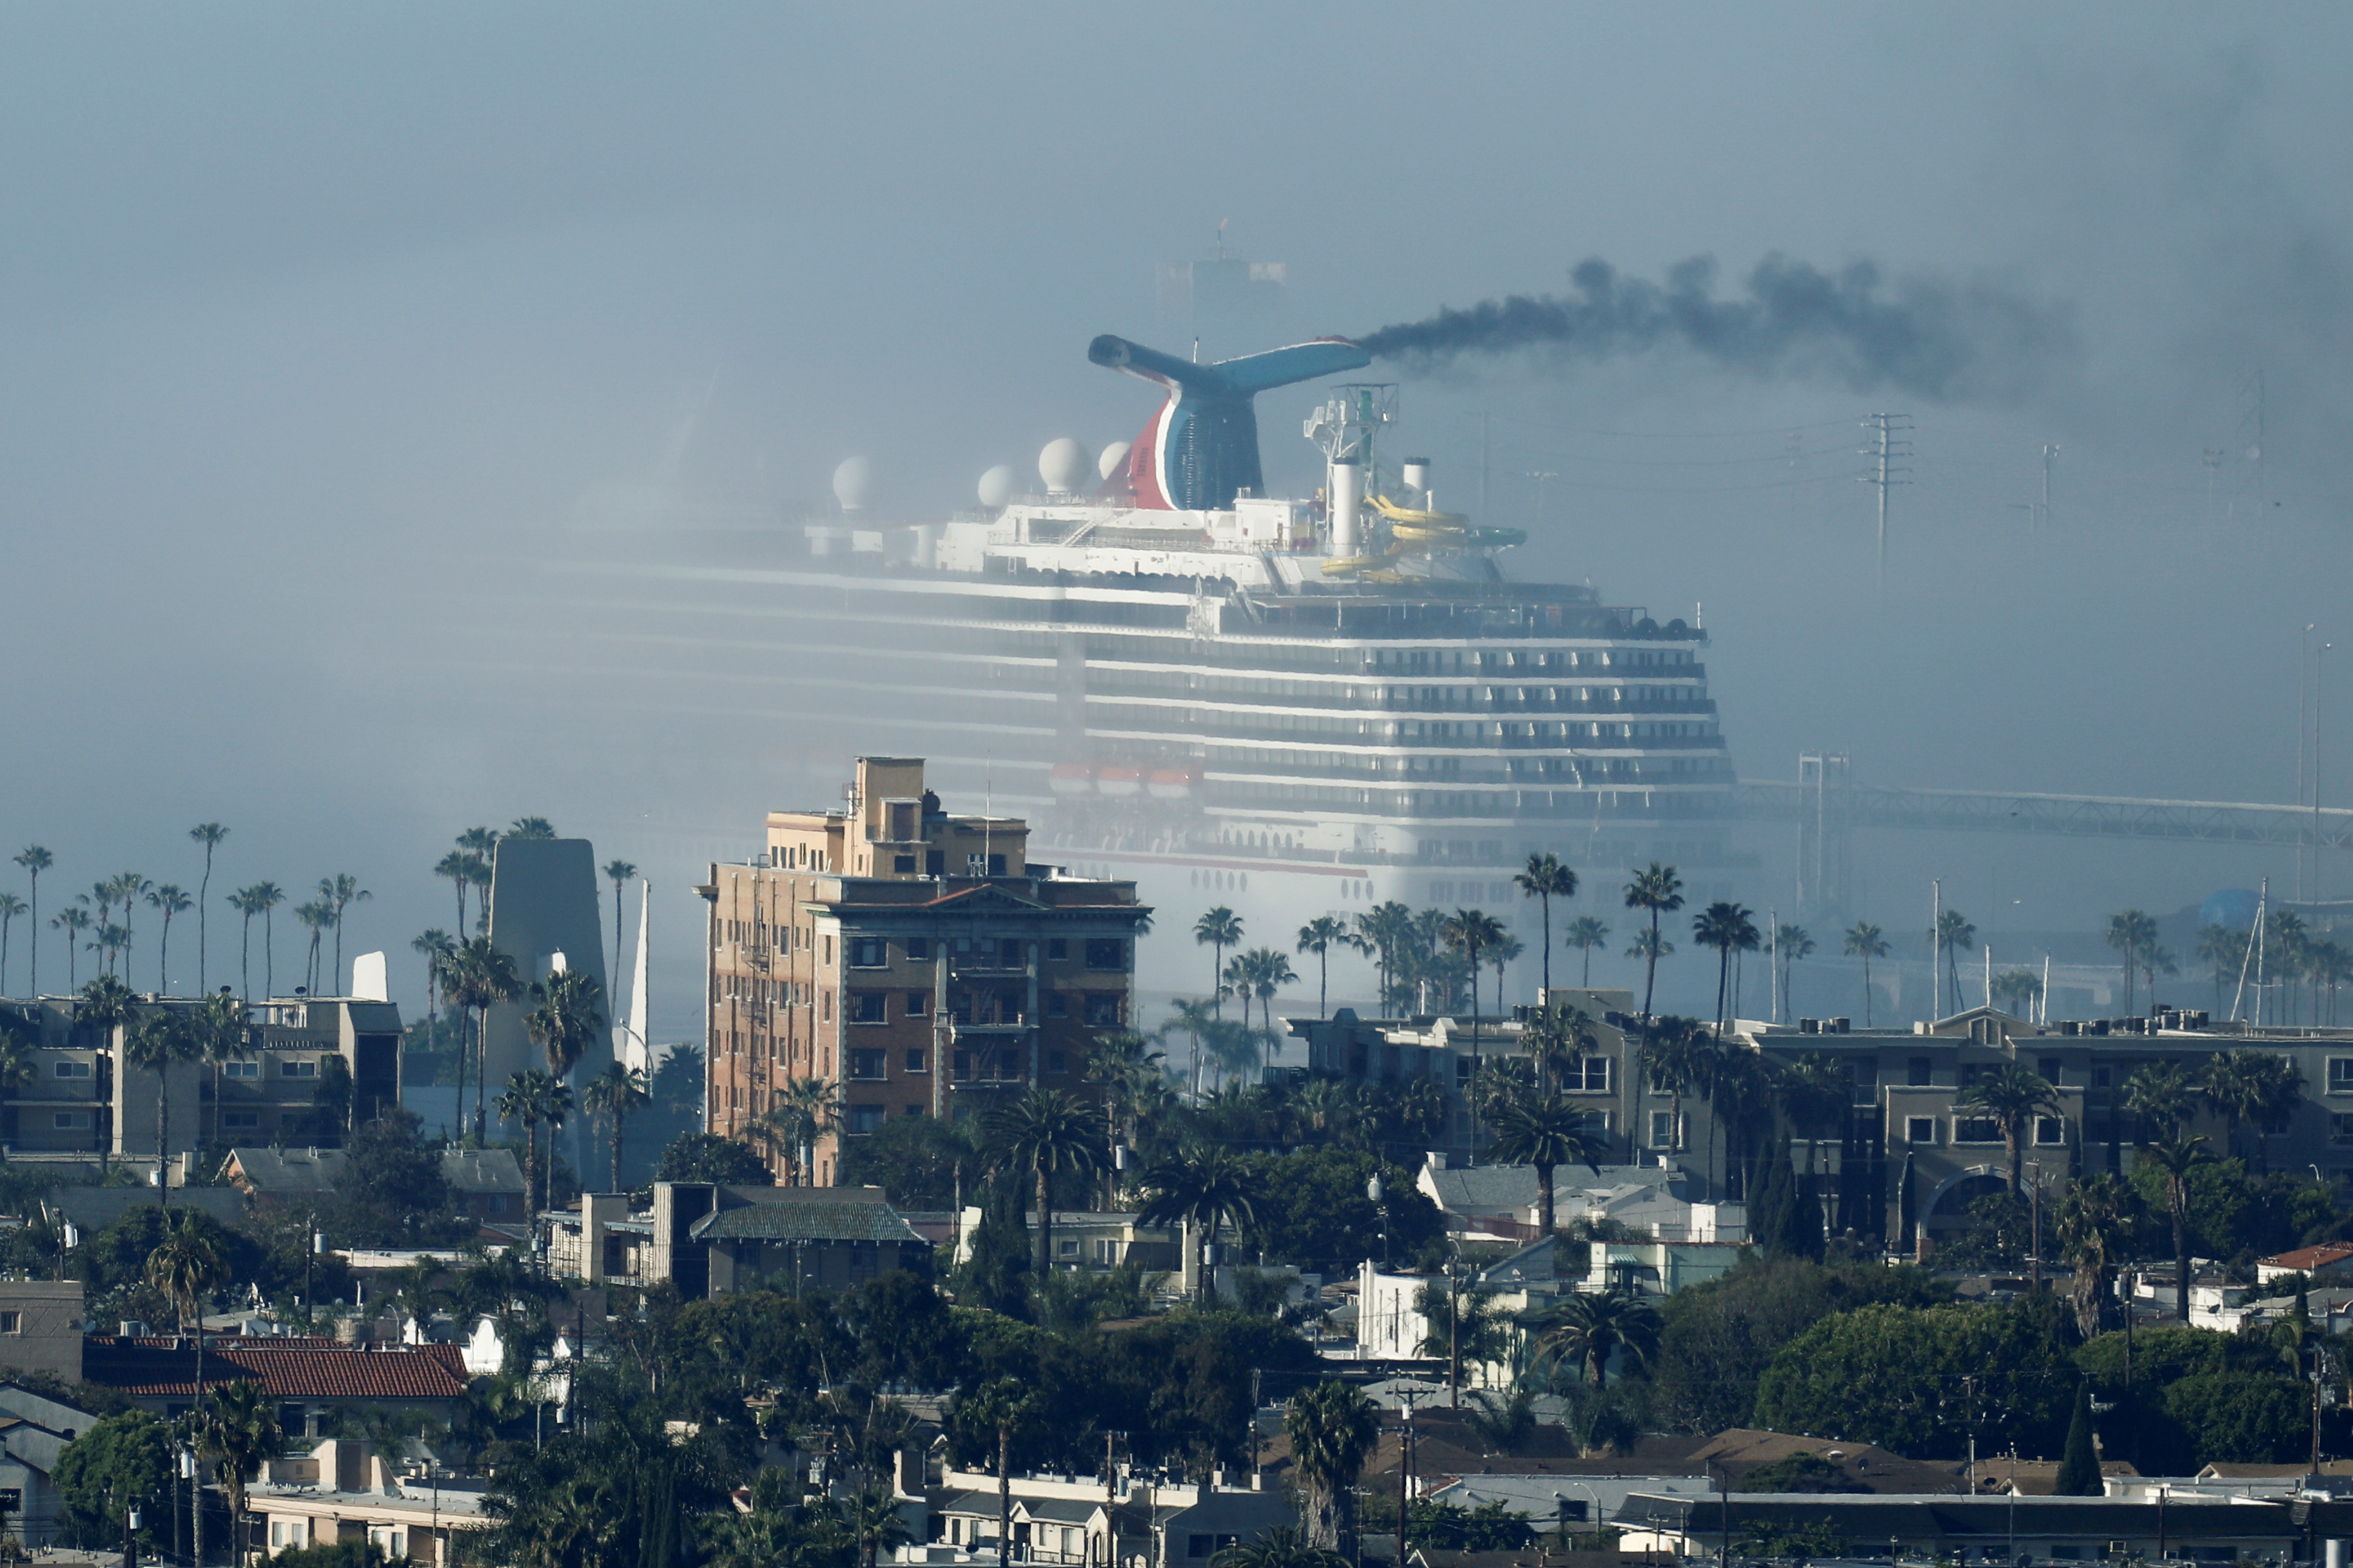 The cruise ship Carnival Miracle sits in fog at the port of the Long Beach, California